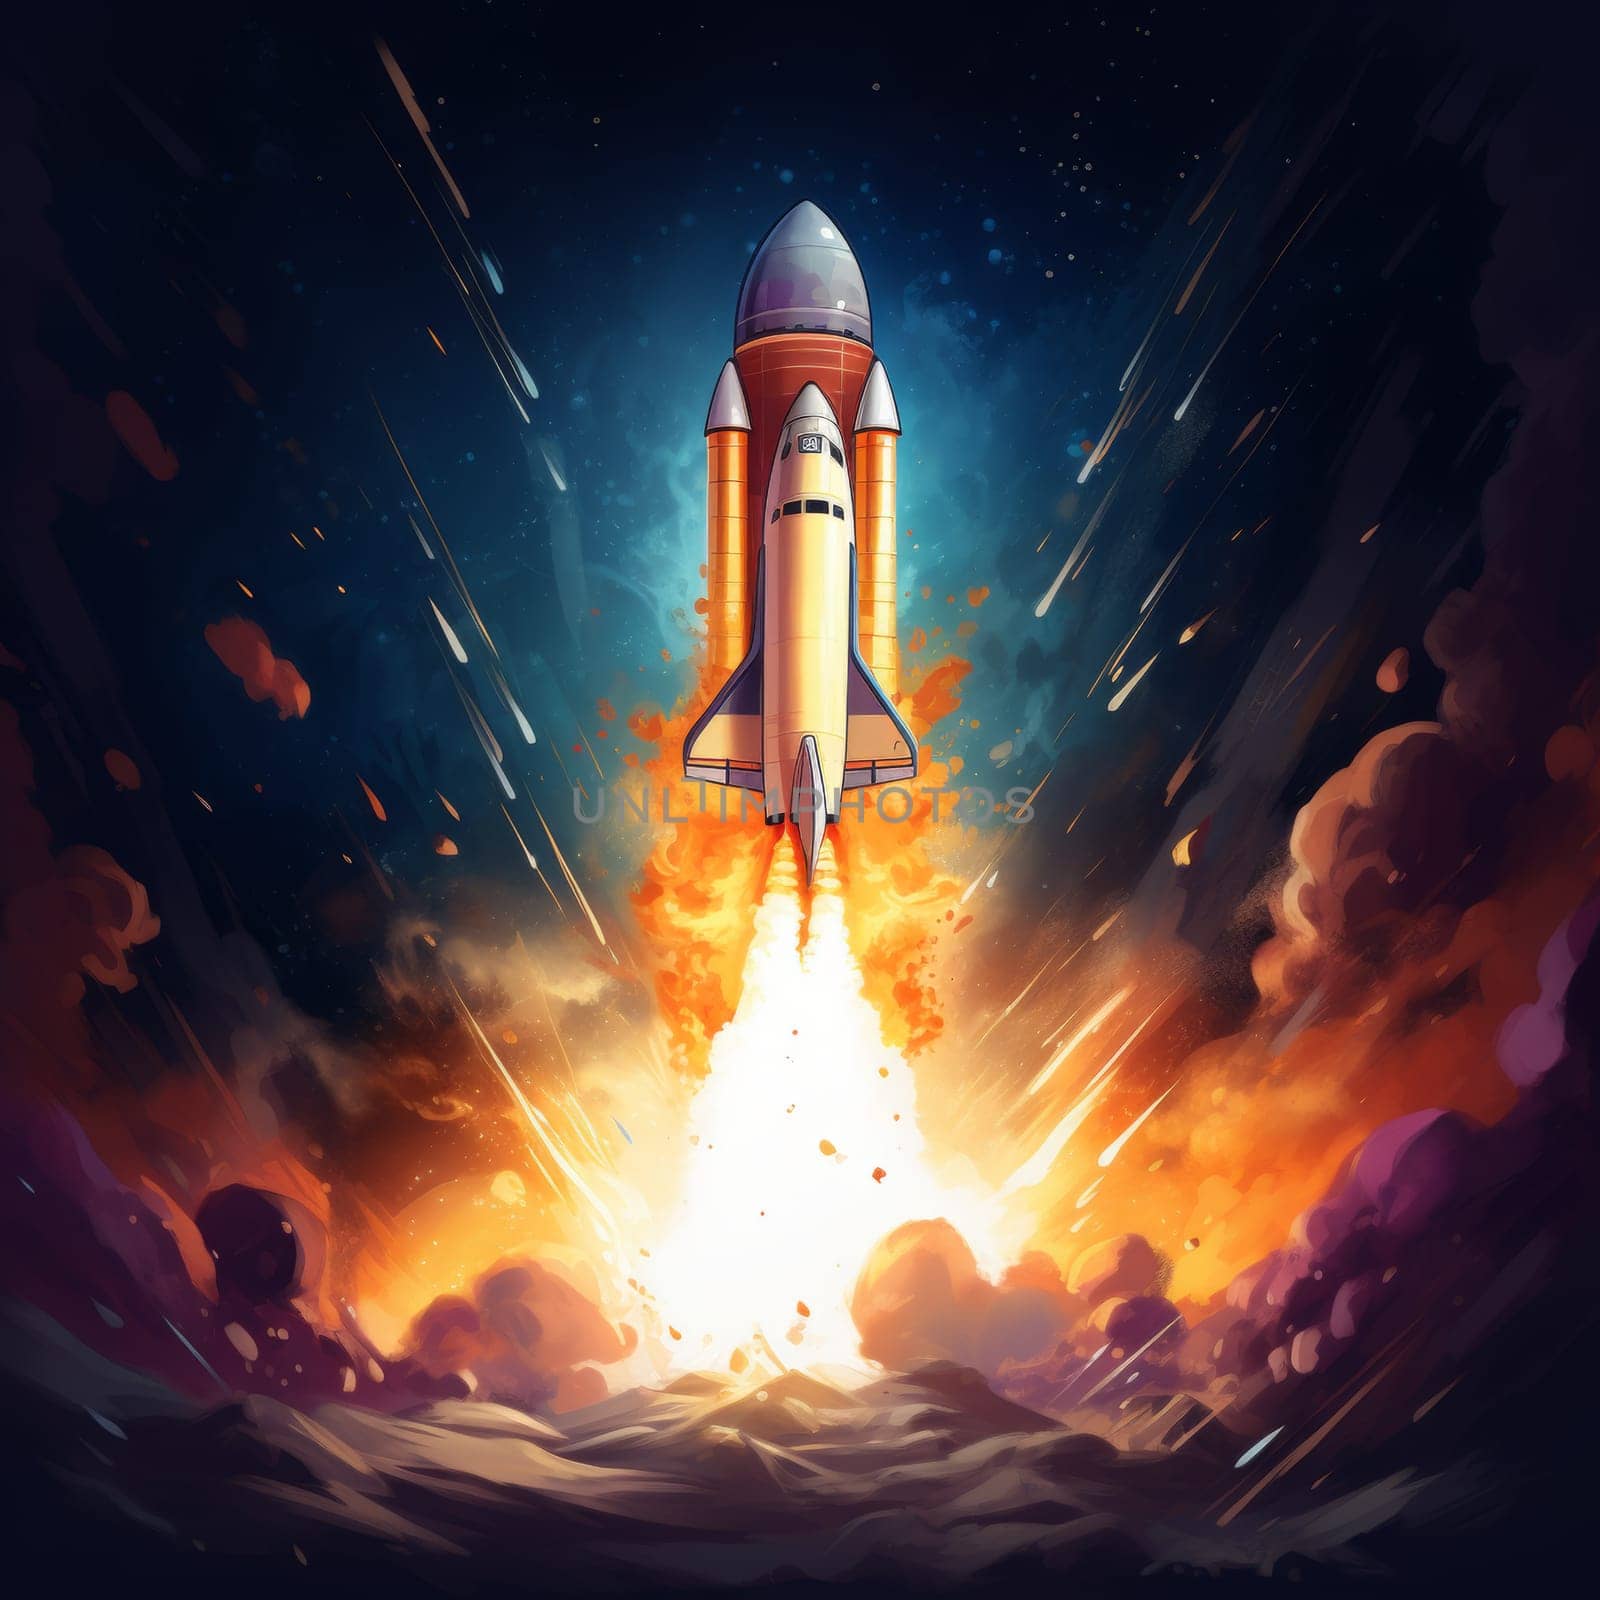 Successful Rocket Launching with Crew on a Space Exploration Mission. Flying Spaceship Blasts Flames and Smoke on a Take-Off. Humanity in Space, Conquering Universe.